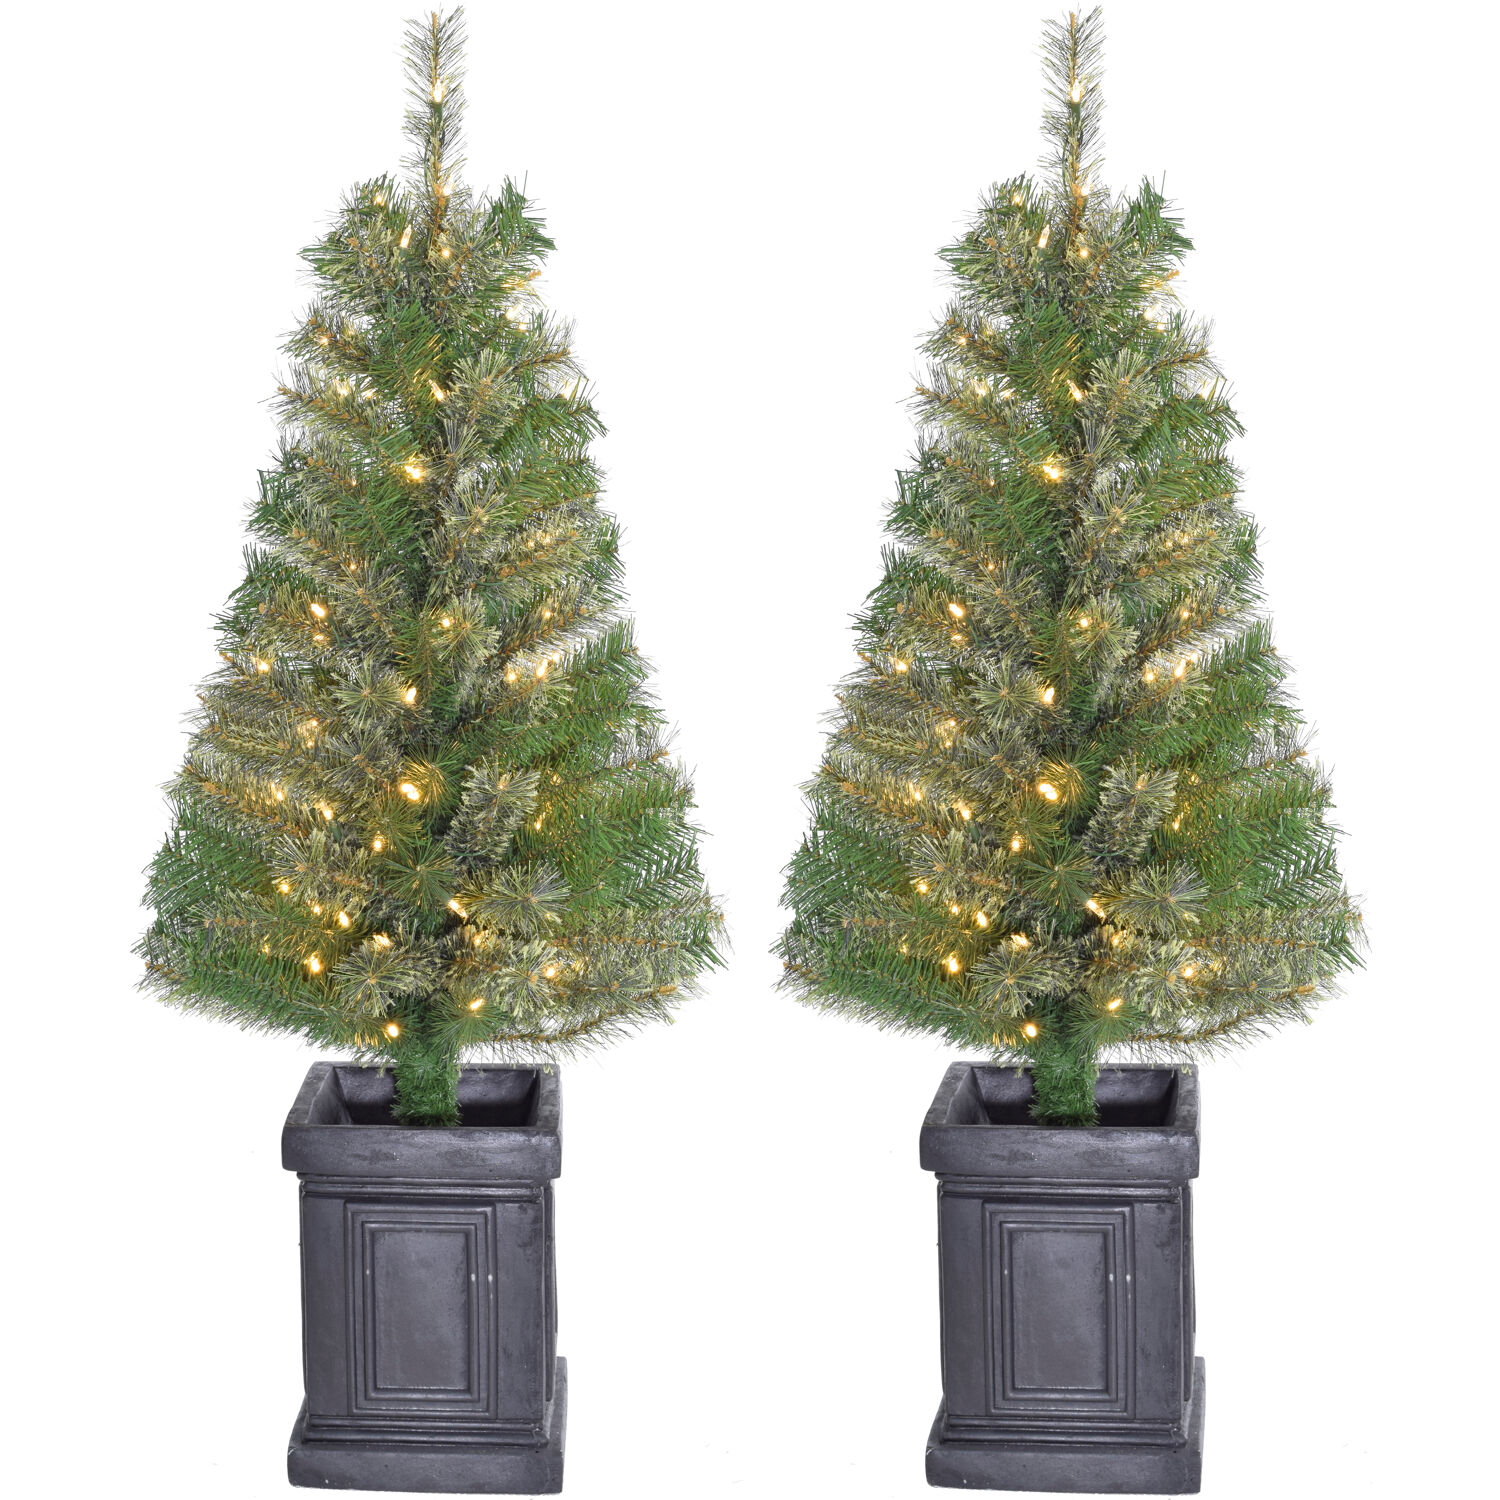 Fraser Hill Farm 4-Ft. Set of 2 Porch Accent Tree in Black Pot with Warm White LED Lighting - image 1 of 6